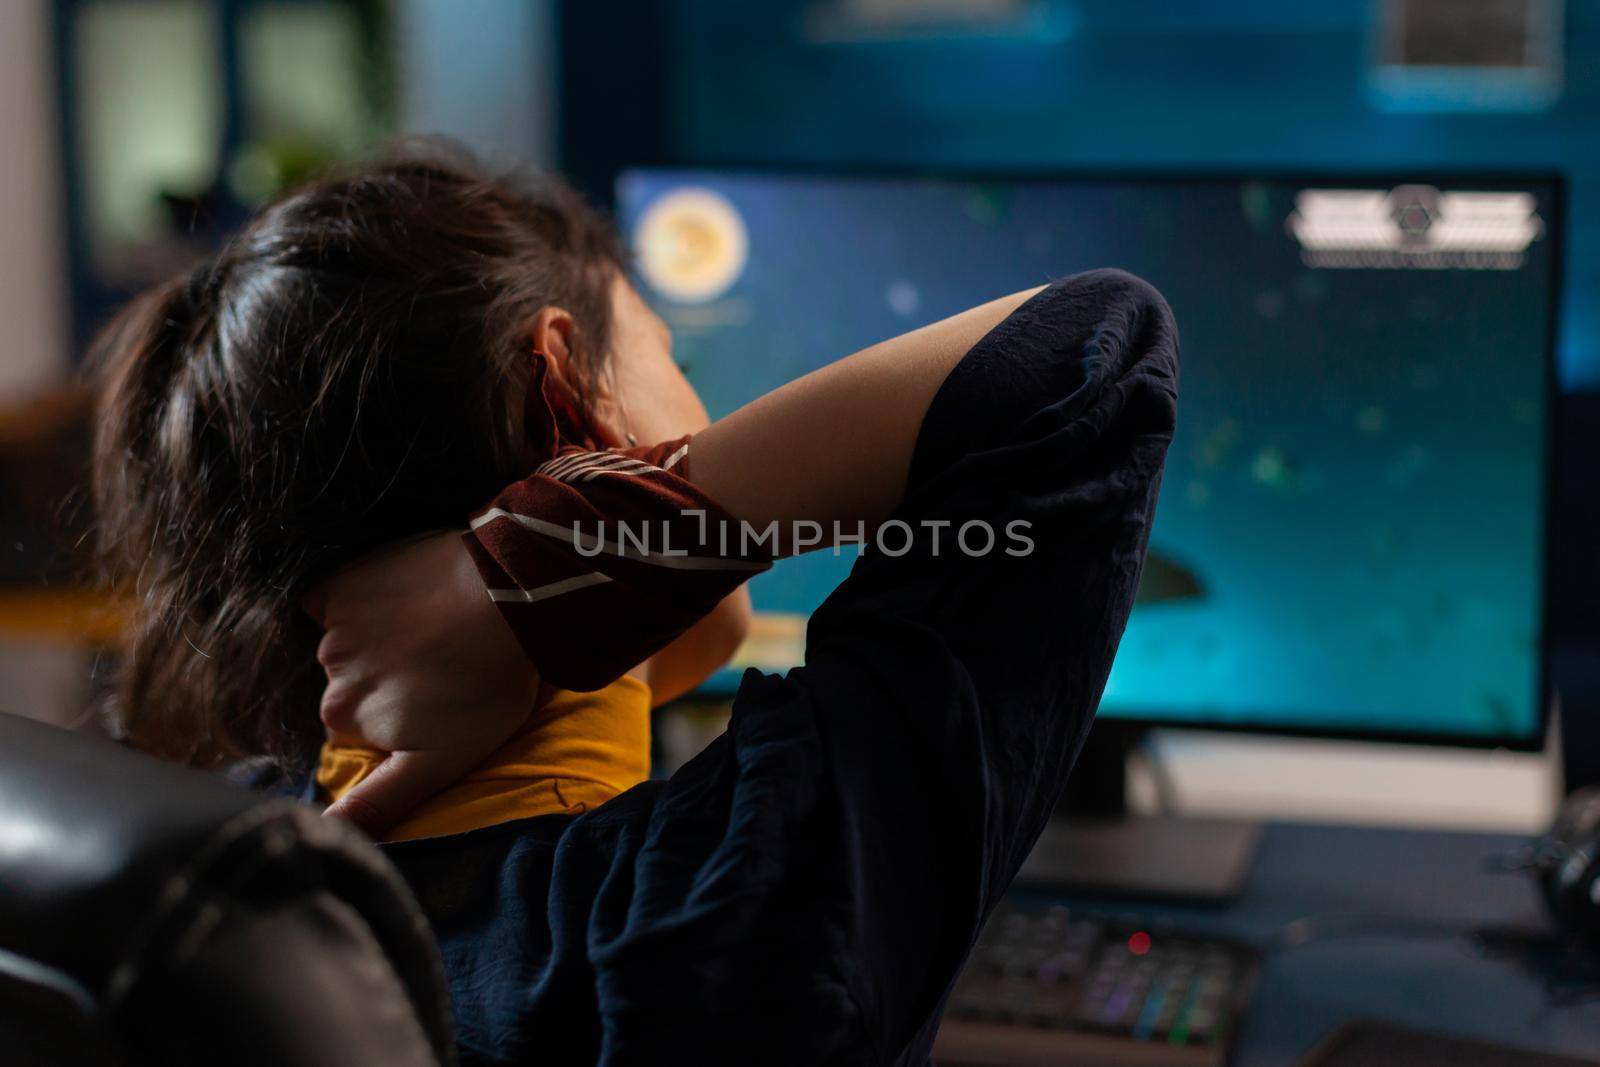 Woman player streatching neck before started playing online videogames on powerful computer in gaming studio. Excited player sitting on gaming chair streaming video games using RGB keyword